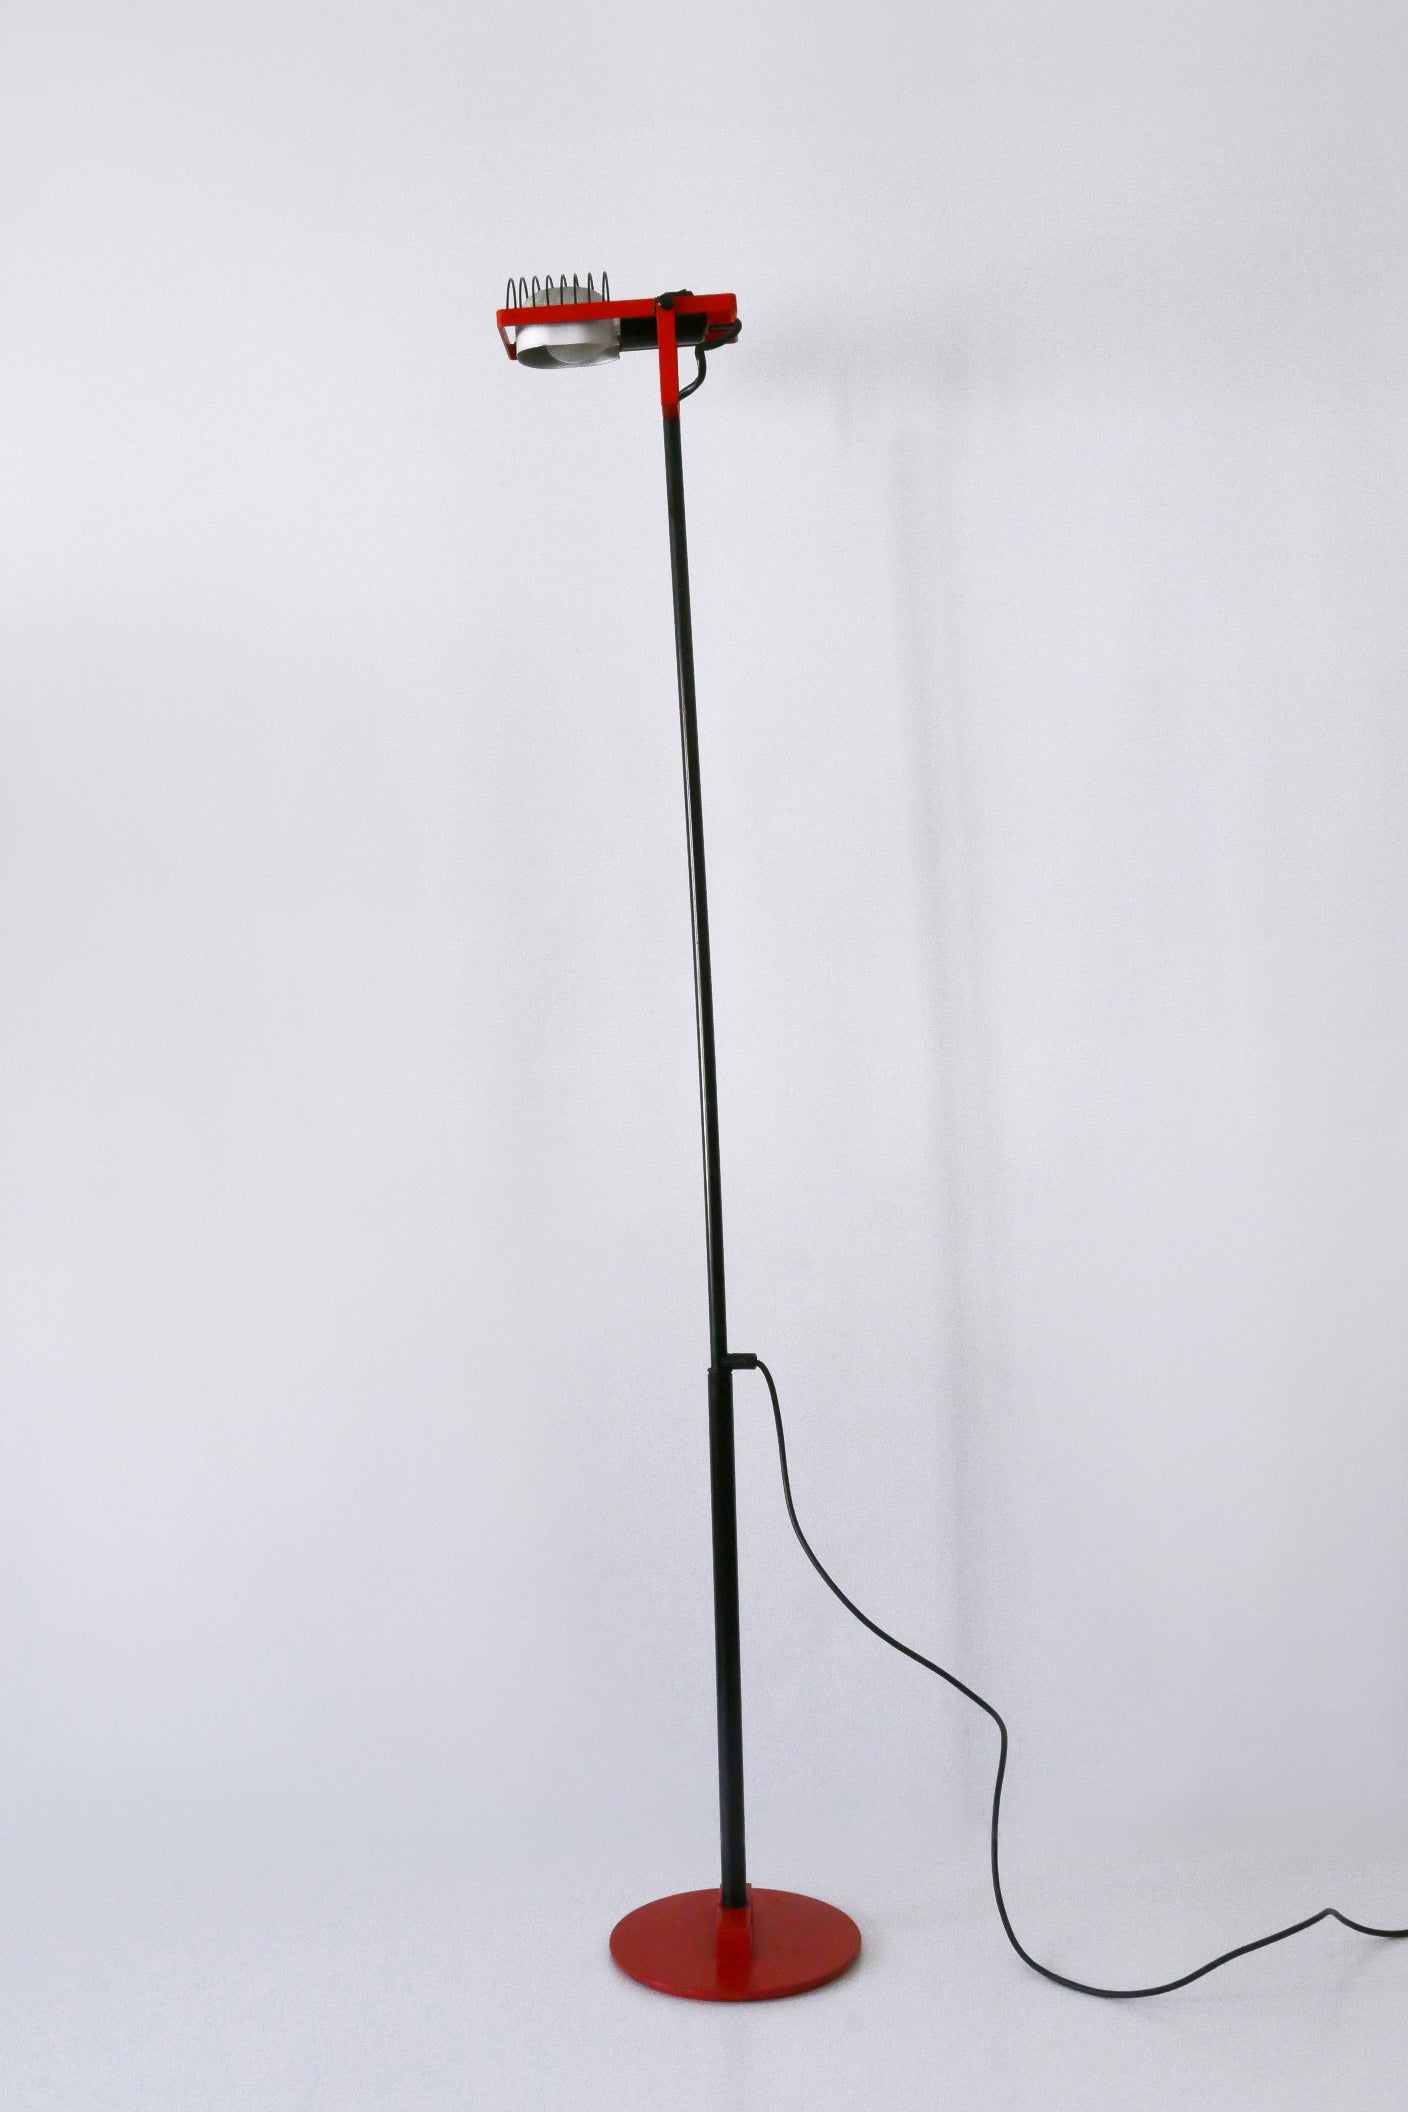 Vintage telescopic and rotating floor lamp or reading light 'Sintesi'. Adjustable in vertically and horizontally. Designed by Ernesto Gismondi for Arteluce, Italy, 1970s. Makers mark beneath the base.

Executed in black, red and silver enameled